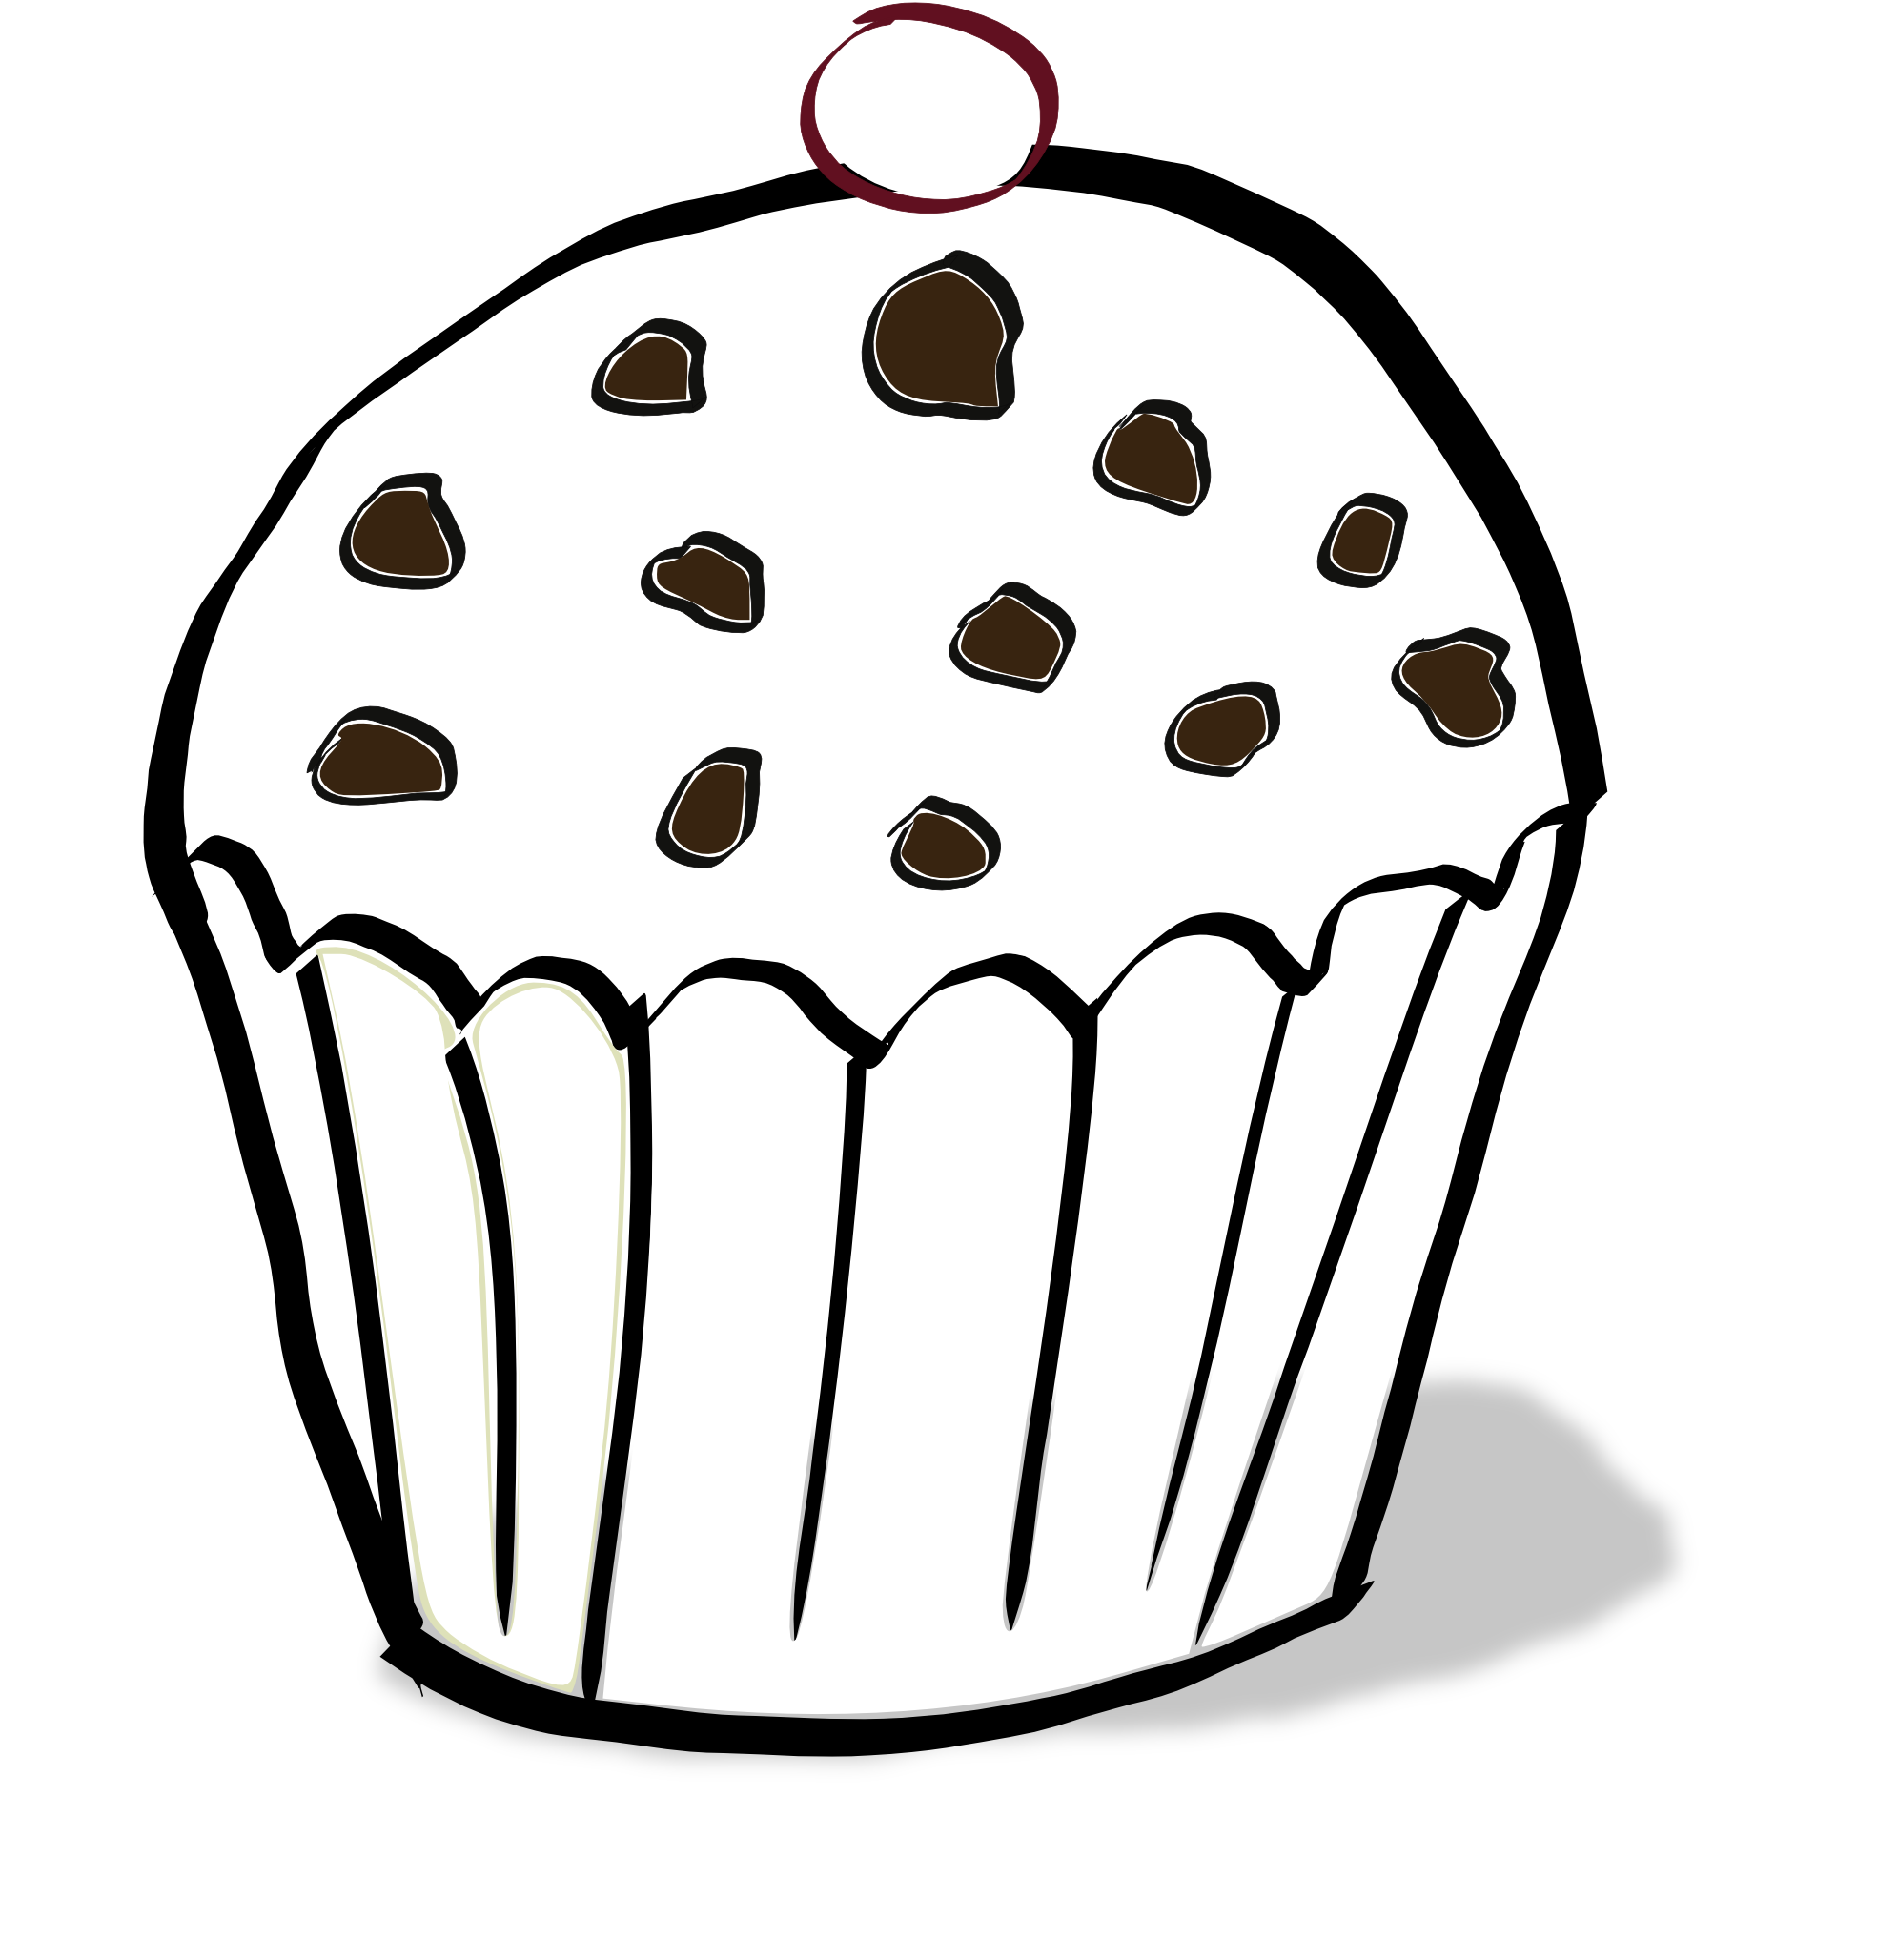 Chocolate Chips Muffin Coloring Book SVG colouringbook.org